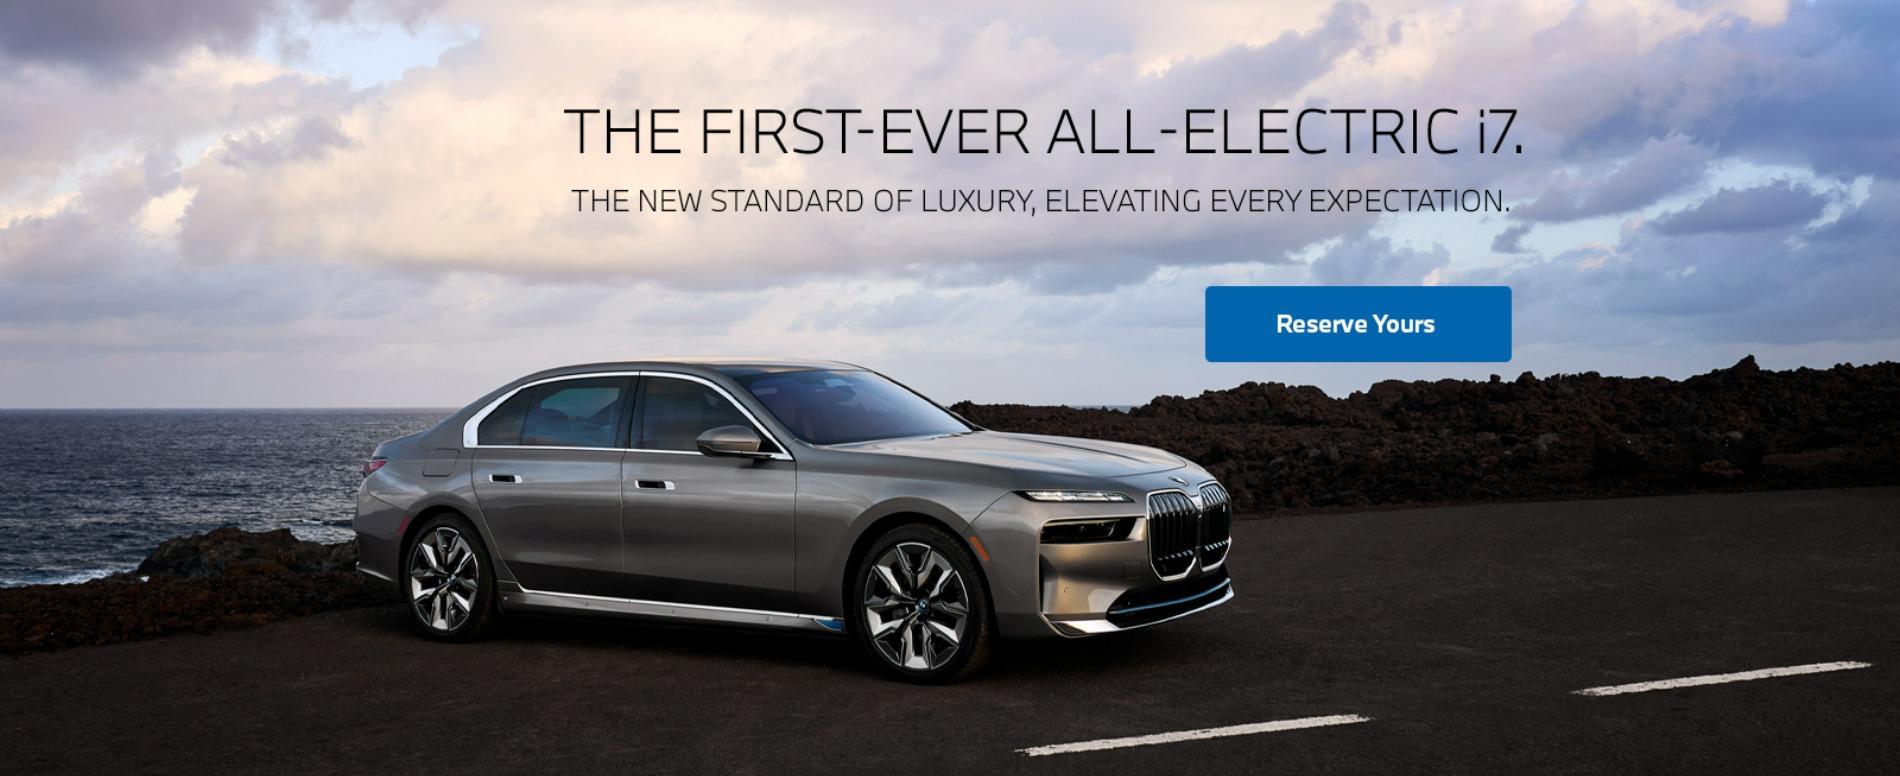 The First-Ever All-Electric BMW i7, click to reserve yours.